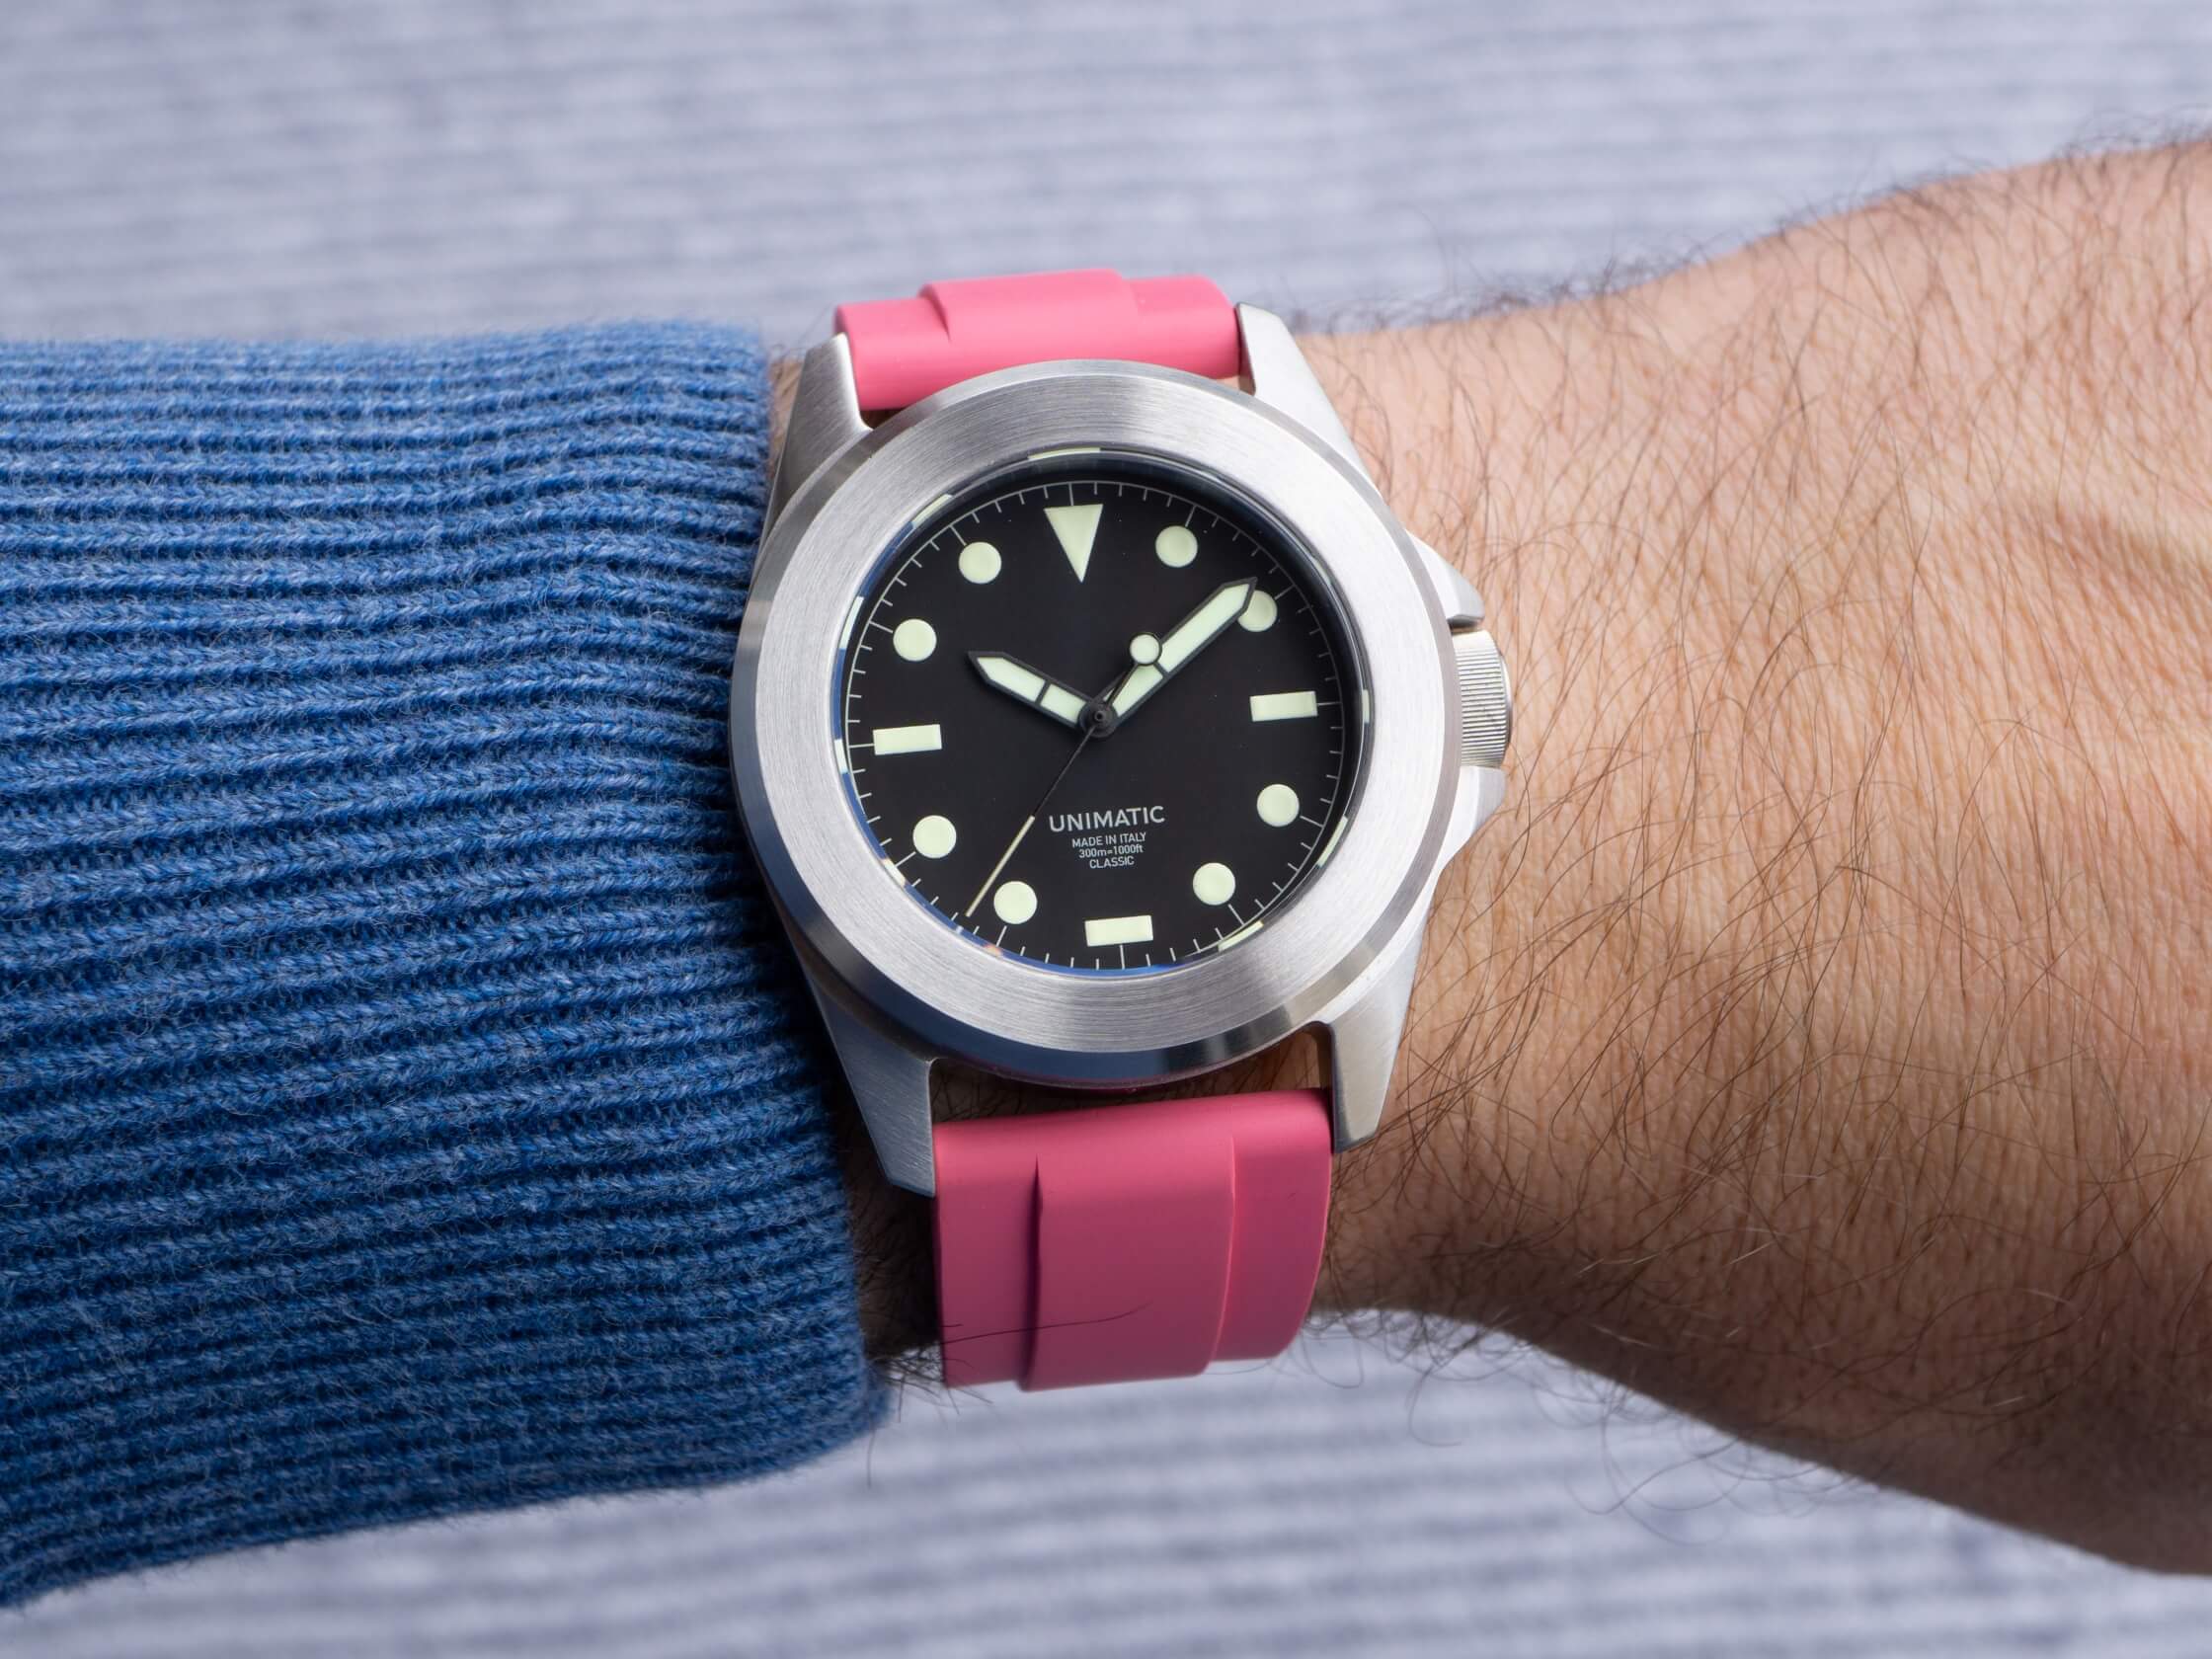 Pink FKM Rubber Strap by Brodinkee and StrapHabit on a Unimatic watch 